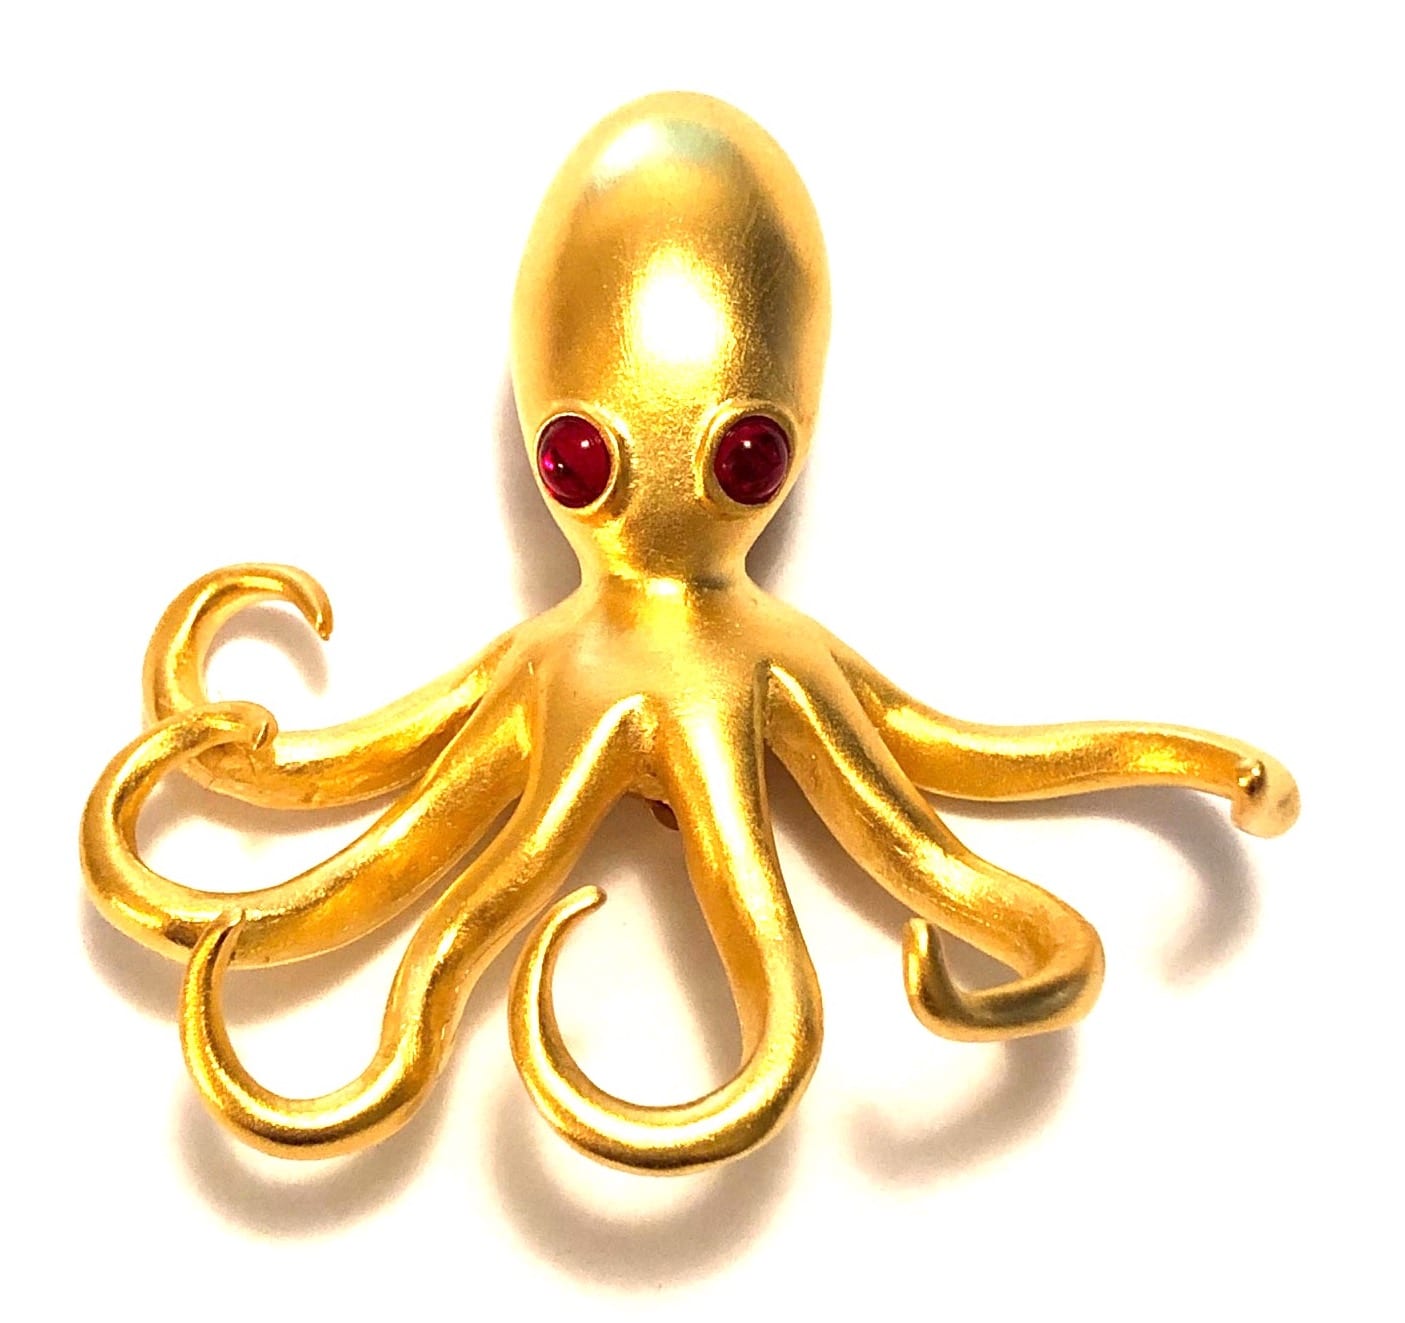 Yellow octopus is Kate Landry, $66.75 at Dillard's, left, and a